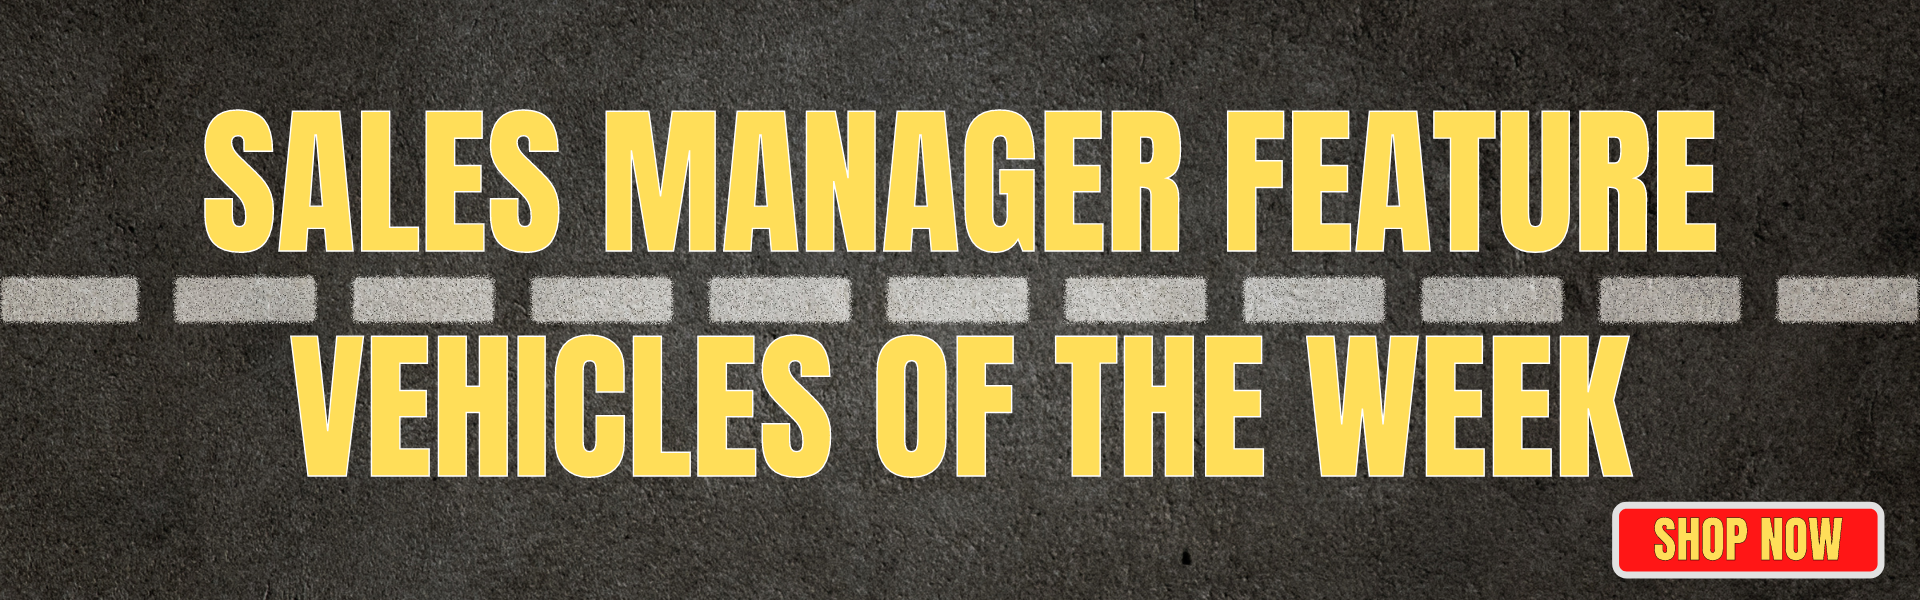 Sales Manager Feature Vehicles of the Week